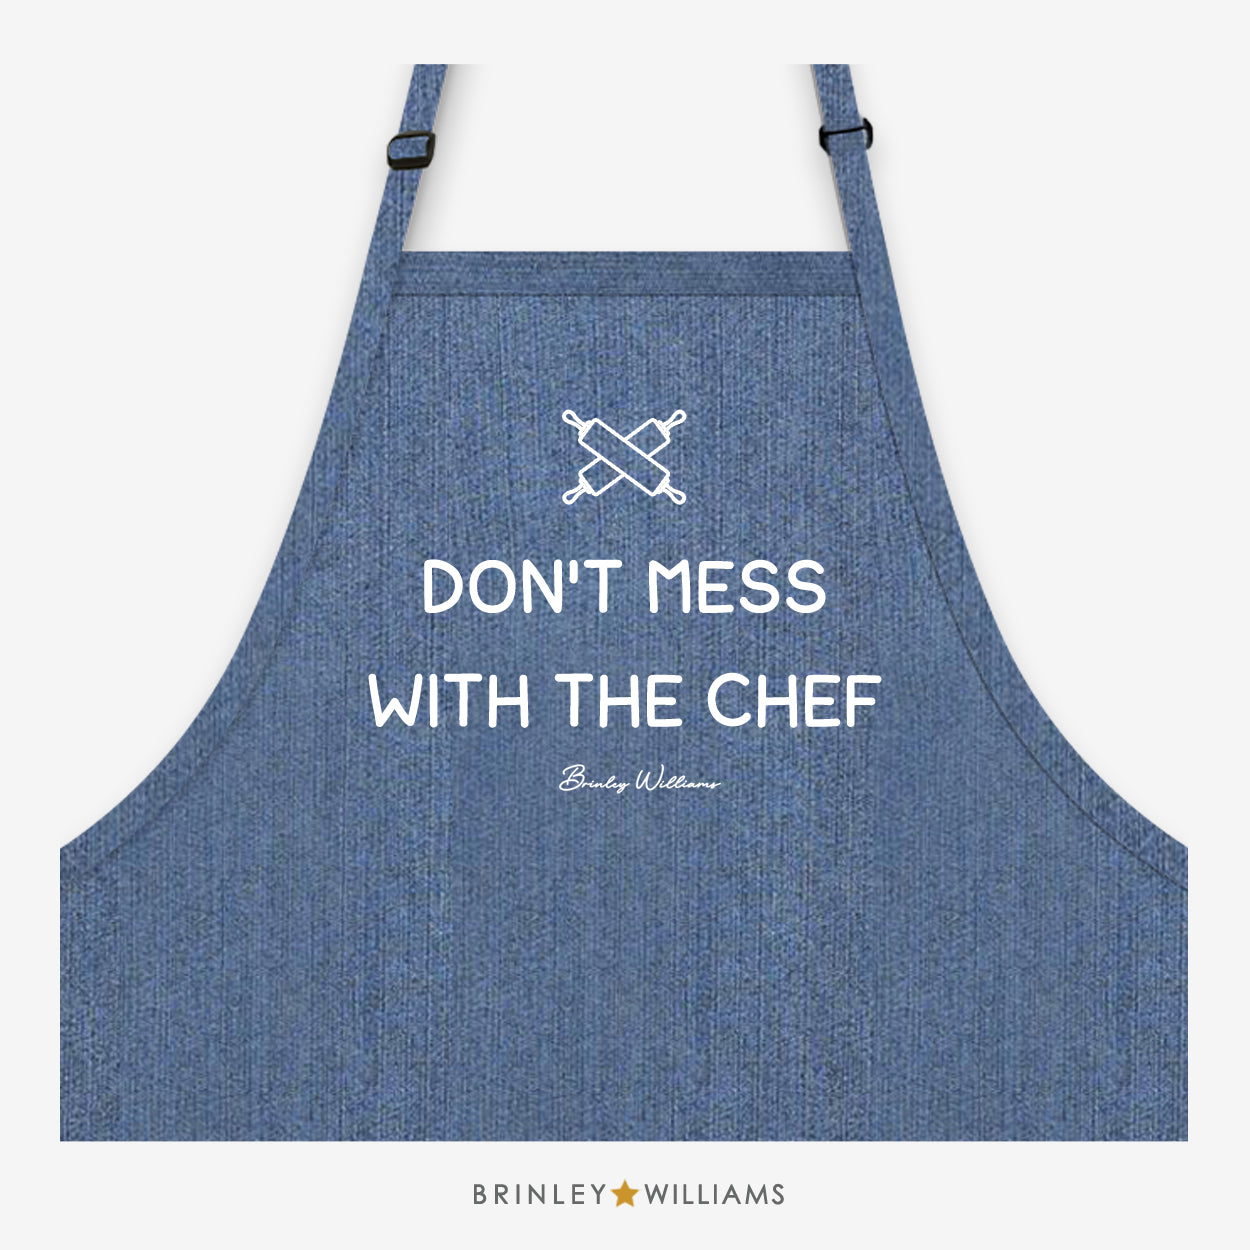 Don't mess with the Chef Apron - Blue Denim